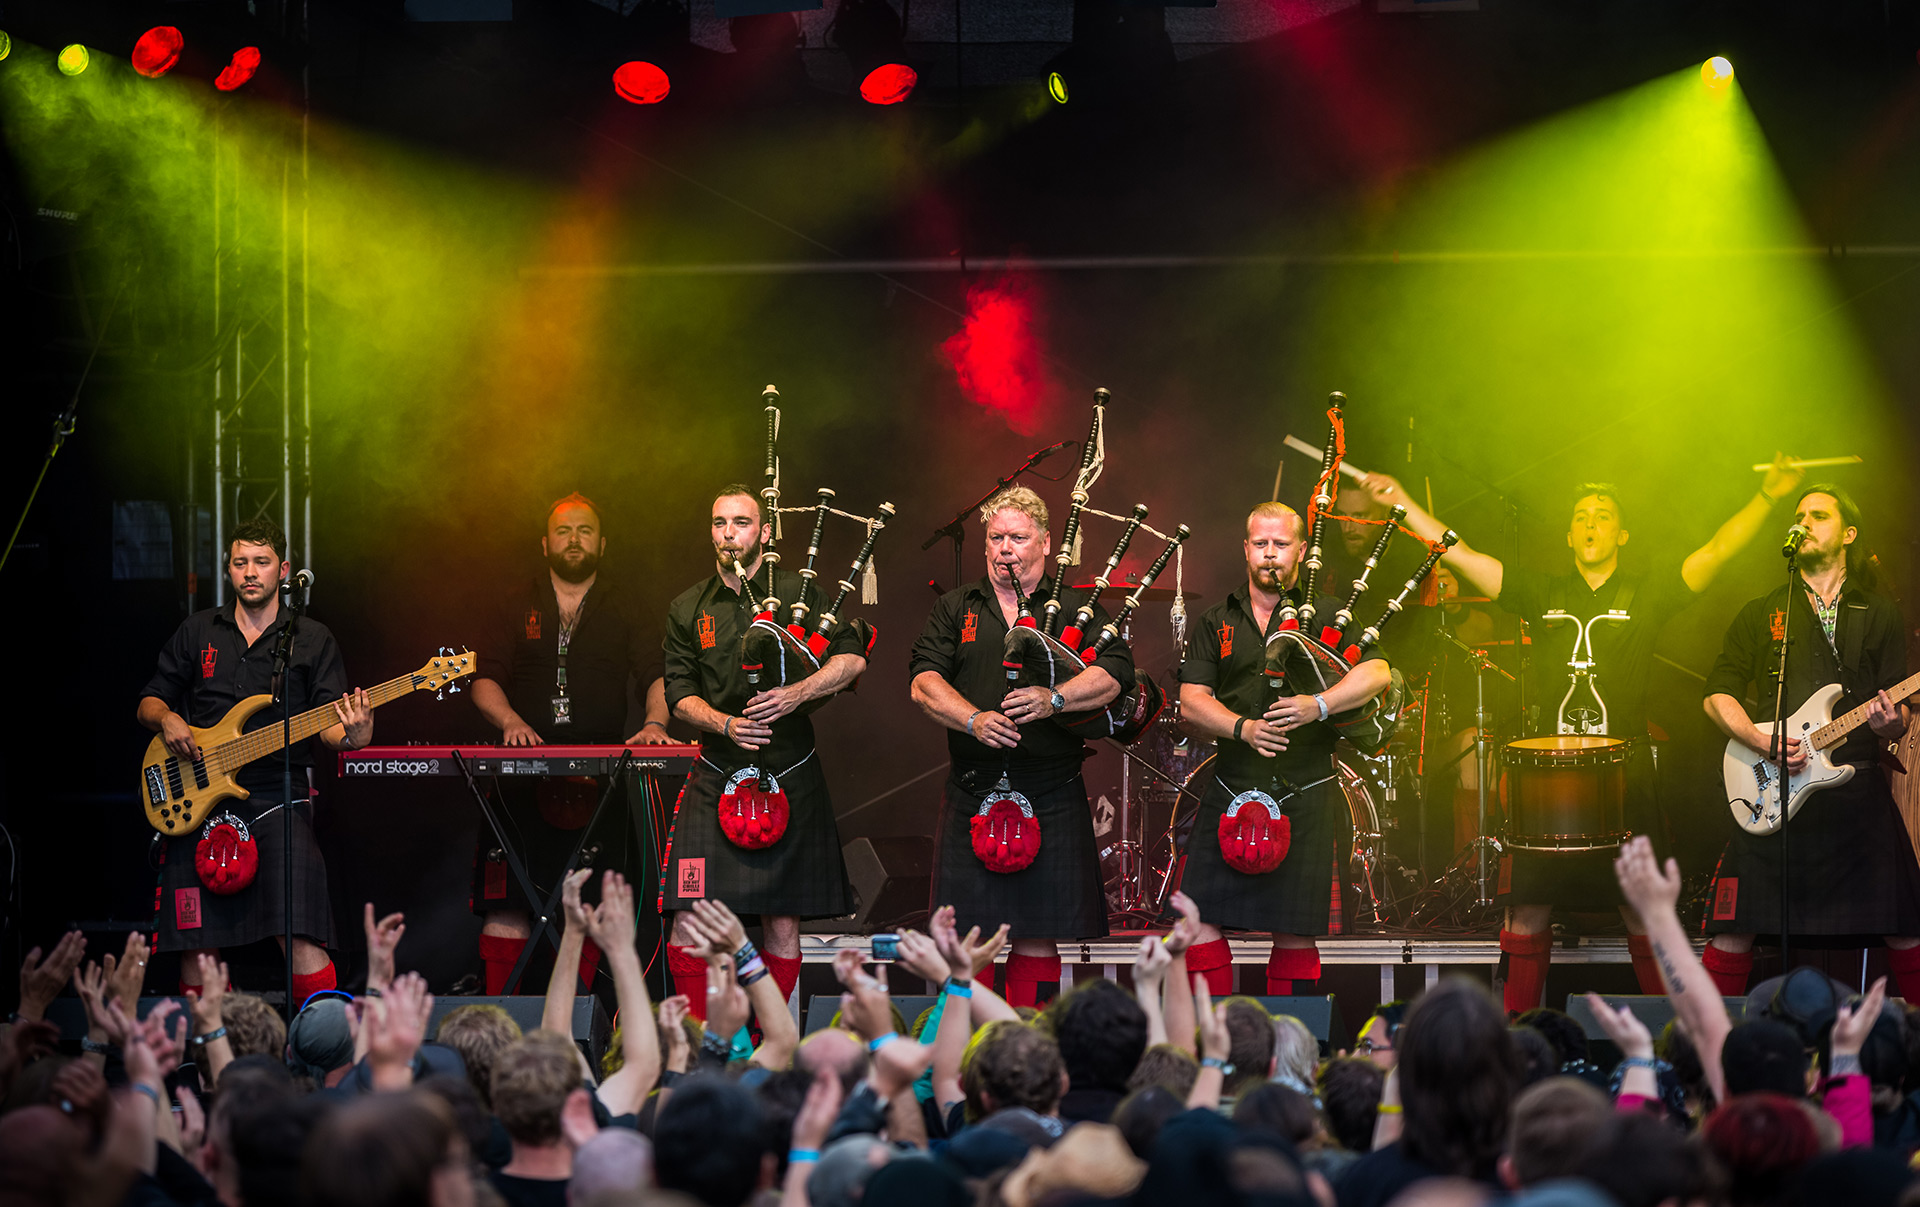 The Red Hot Chilli Pipers - Sponsored by Wallace Bagpipes